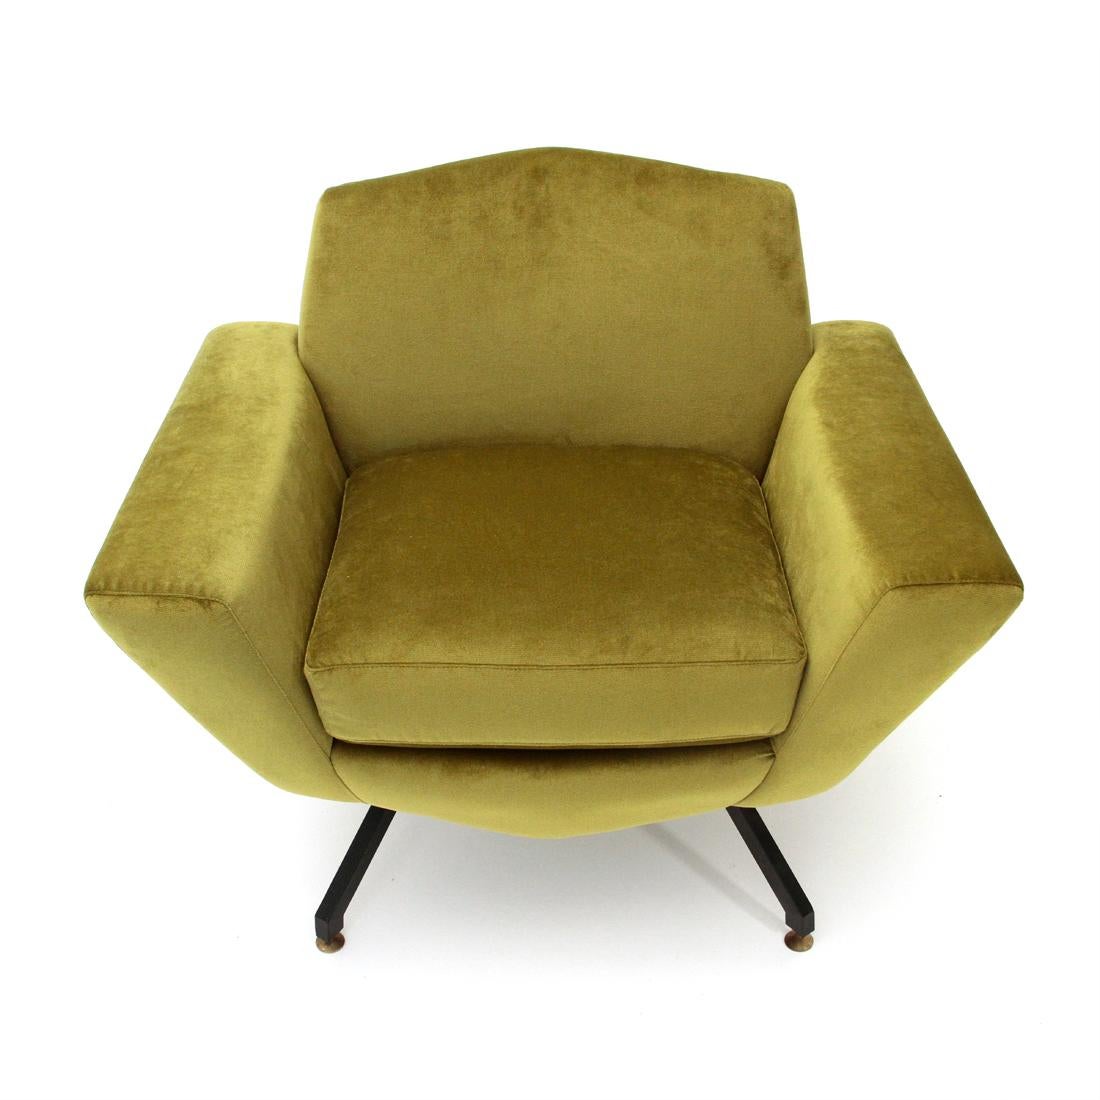 Italian square-shaped armchair manufactured in the 1960s.
Wooden frame padded and lined with new acid green velvet fabric.
Seat formed by removable cushion, and removable cover.
Legs in black painted metal with brass foot.
Excellent general